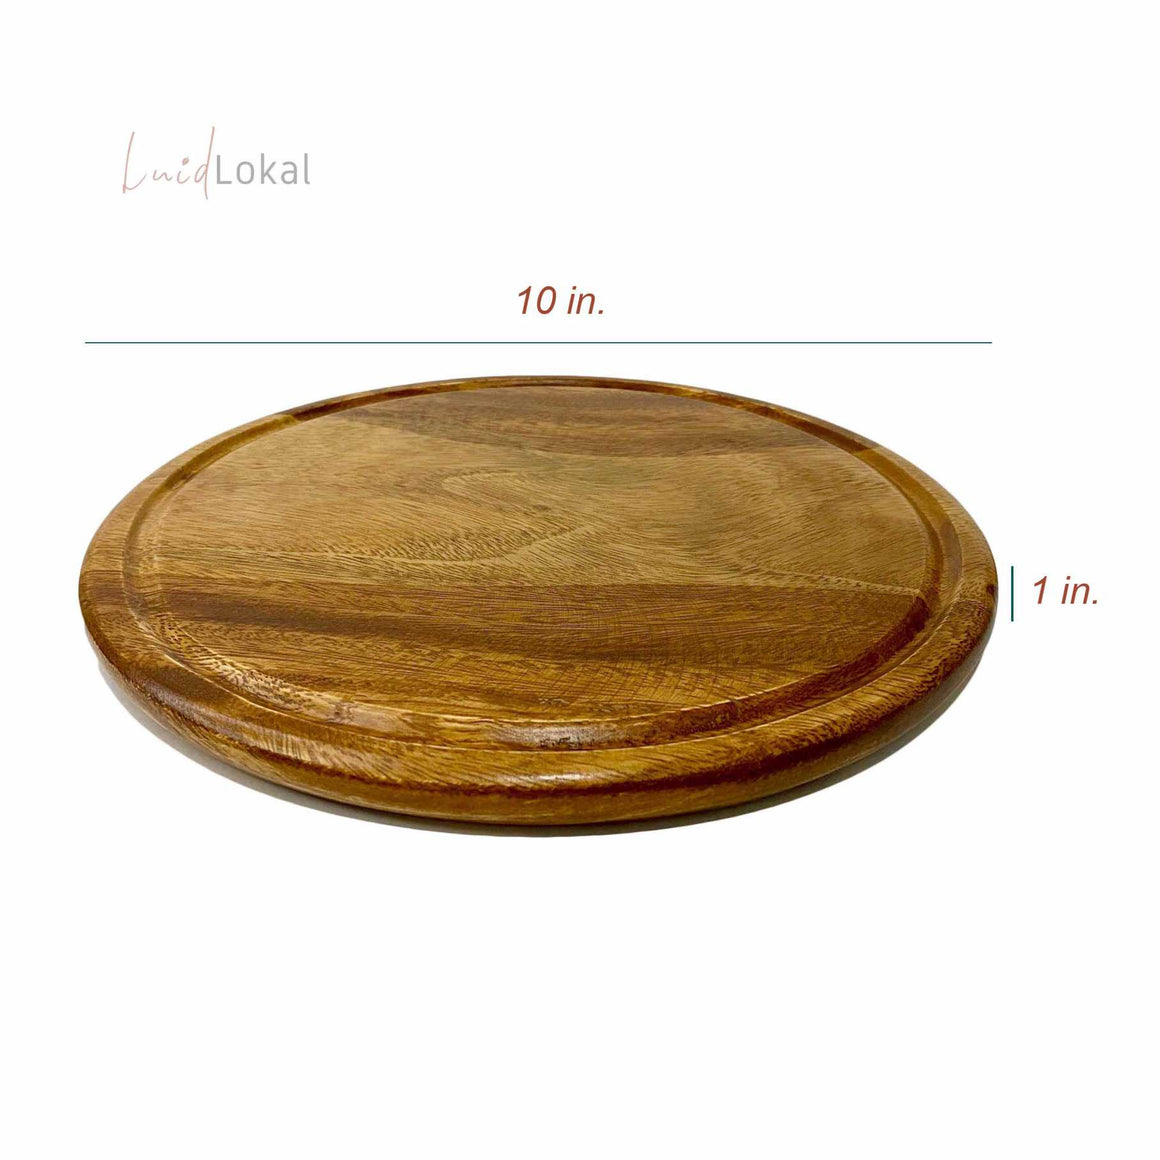 Luid Lokal Steak Board Round Cutting Board with Juice Groove Kitchen Chopping Board for Meat Cheese and Vegetables Acacia Wood